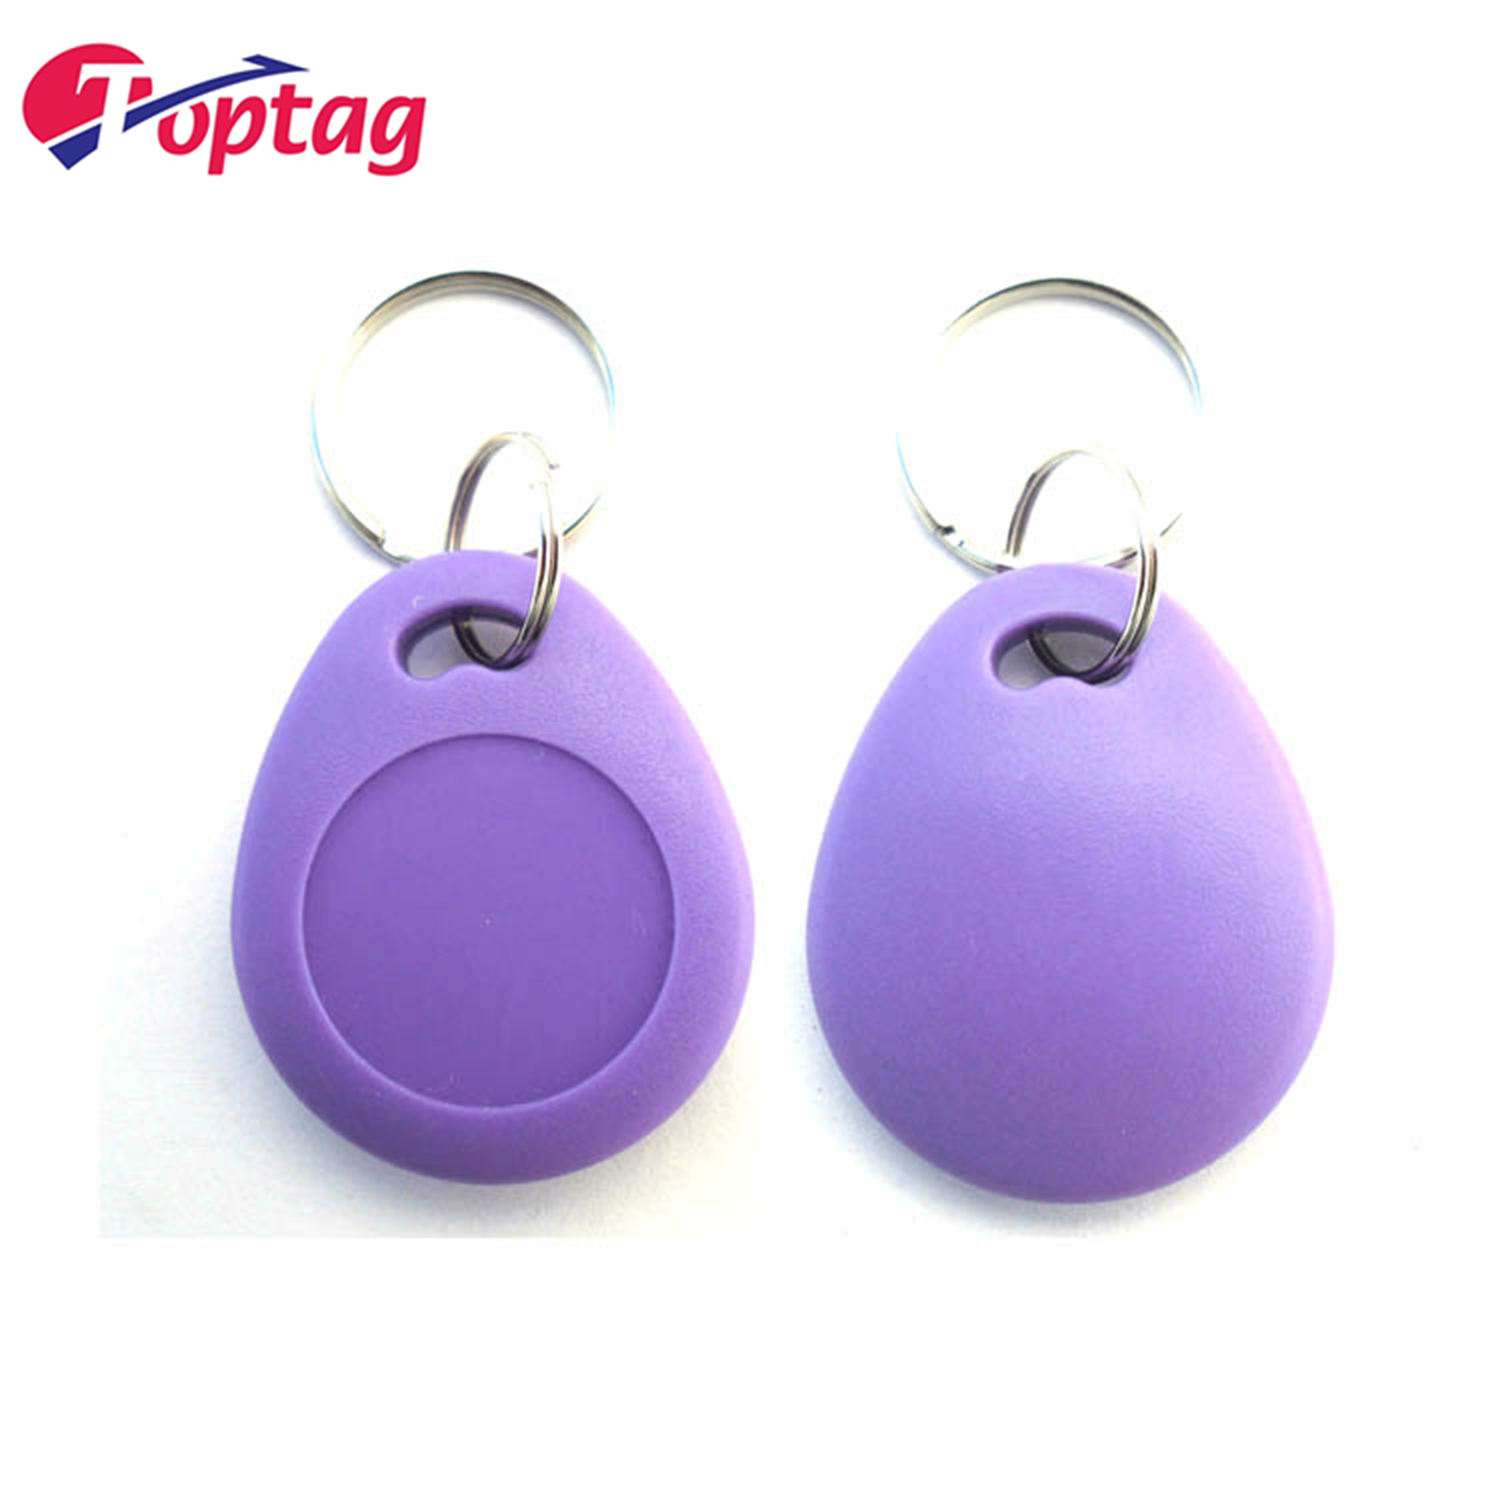 Colorful RFID ABS Transparent Key fobs 125khz 13.56mhz Key Tag With Key Ring